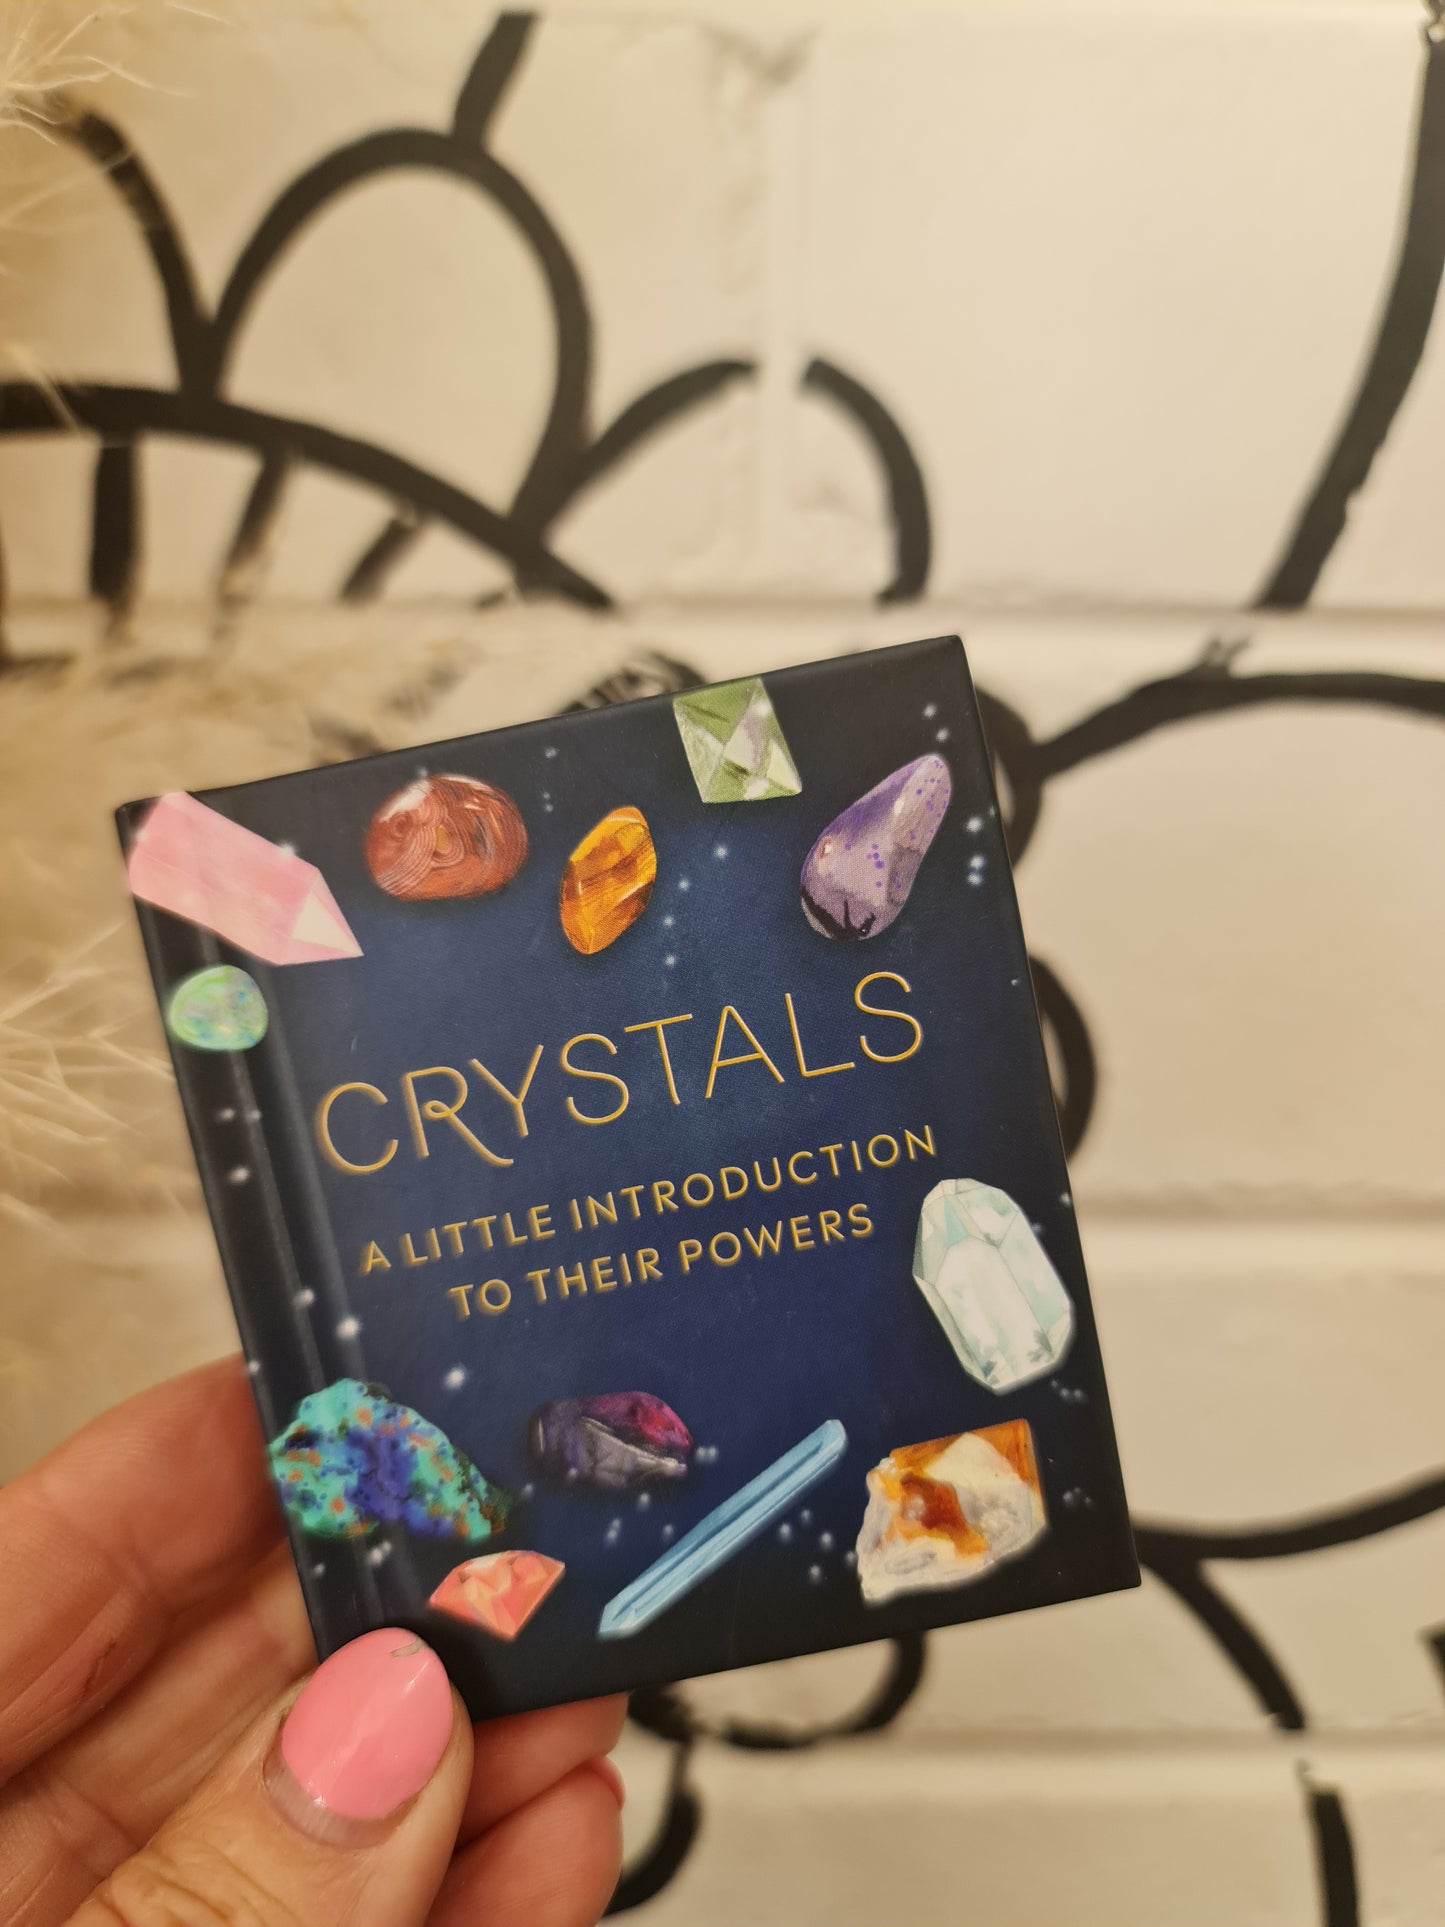 Crystals a little introduction to their powers